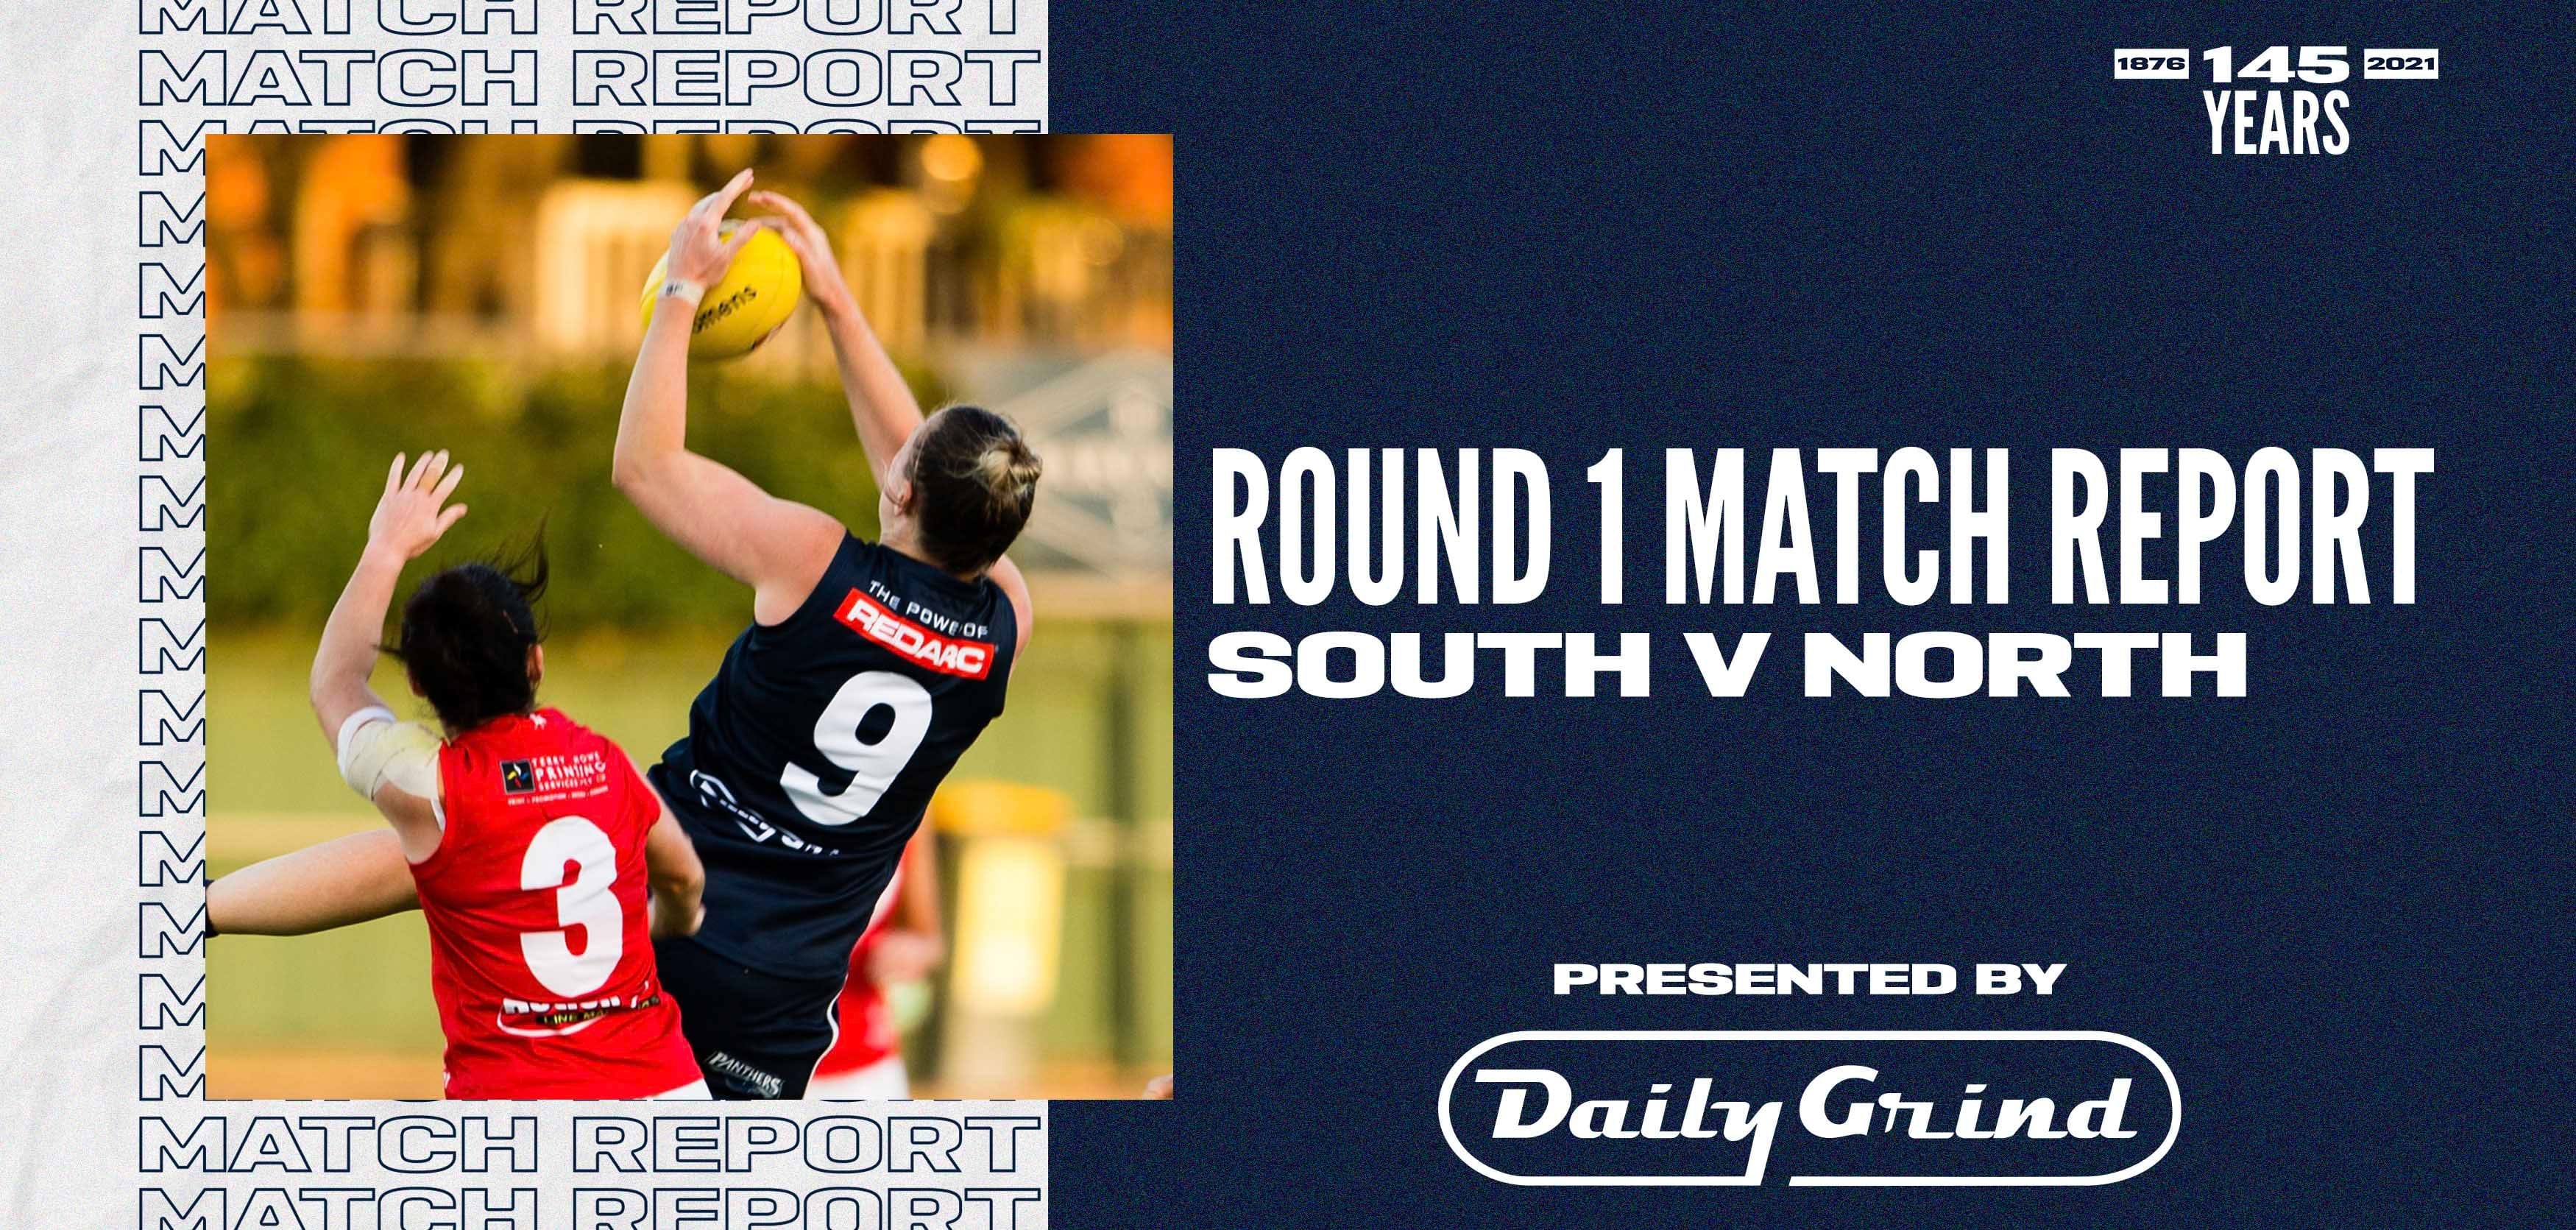 Daily Grind Women's Match Report: Round 1 South vs North 1